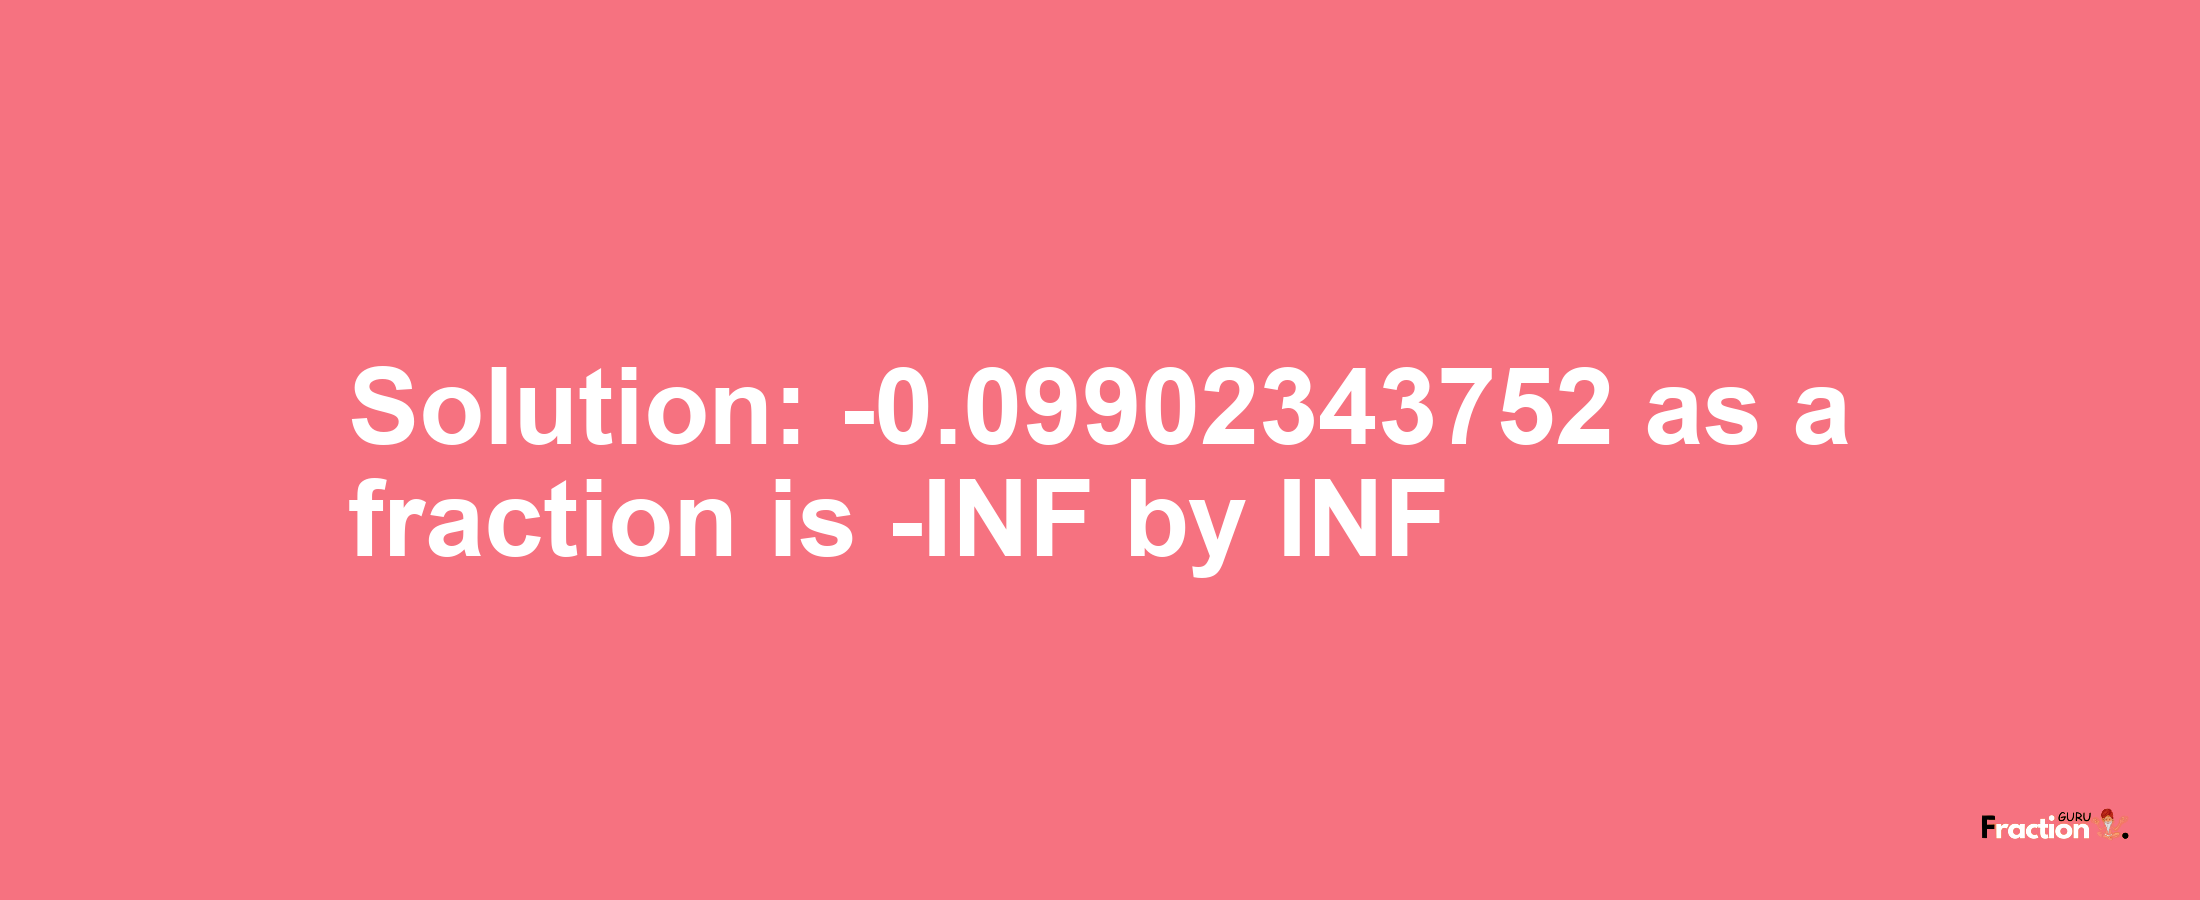 Solution:-0.09902343752 as a fraction is -INF/INF